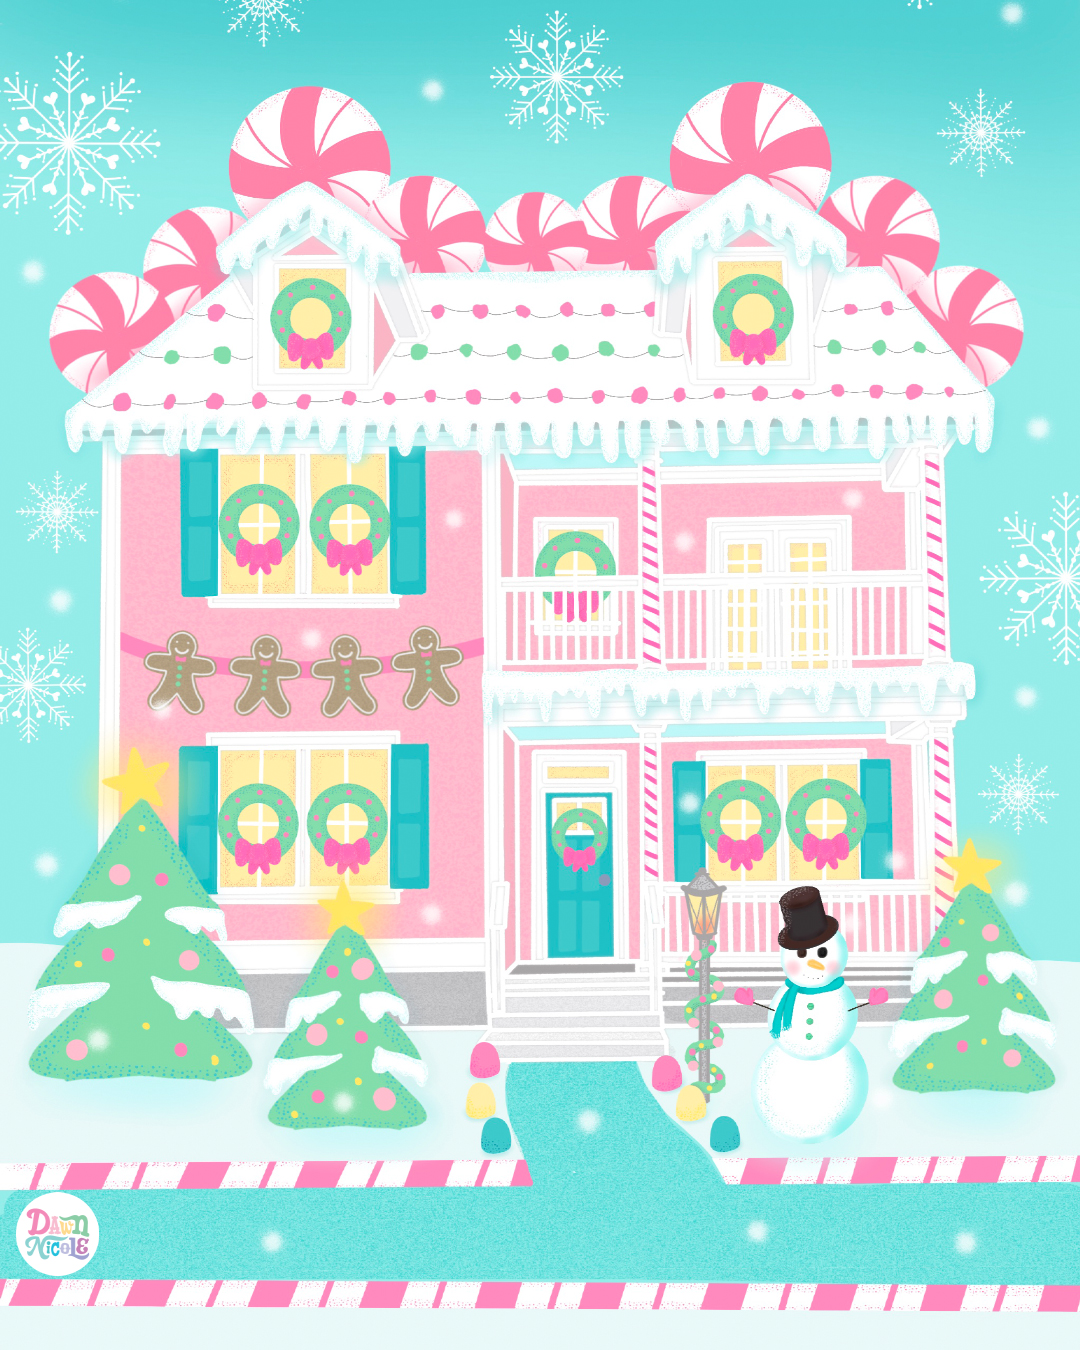 Procreate Illustration: Winter Wonderland Home. How to turn your home into an adorable gingerbread house inspired illustration!